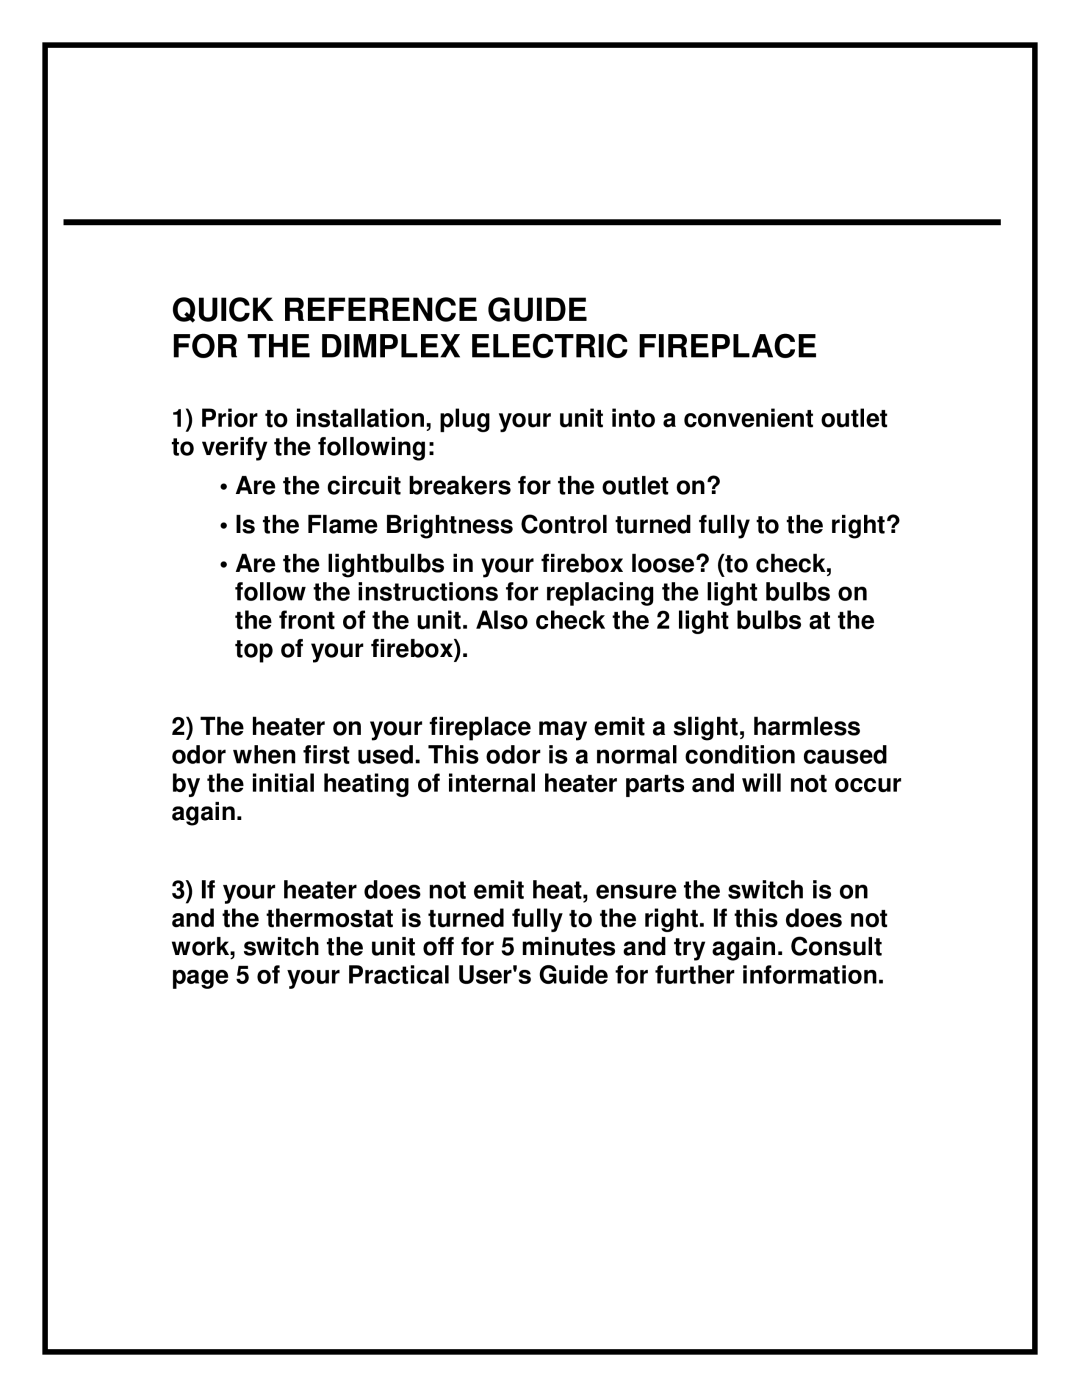 Dimplex DF2603 manual Quick Reference Guide, For The Dimplex Electric Fireplace 